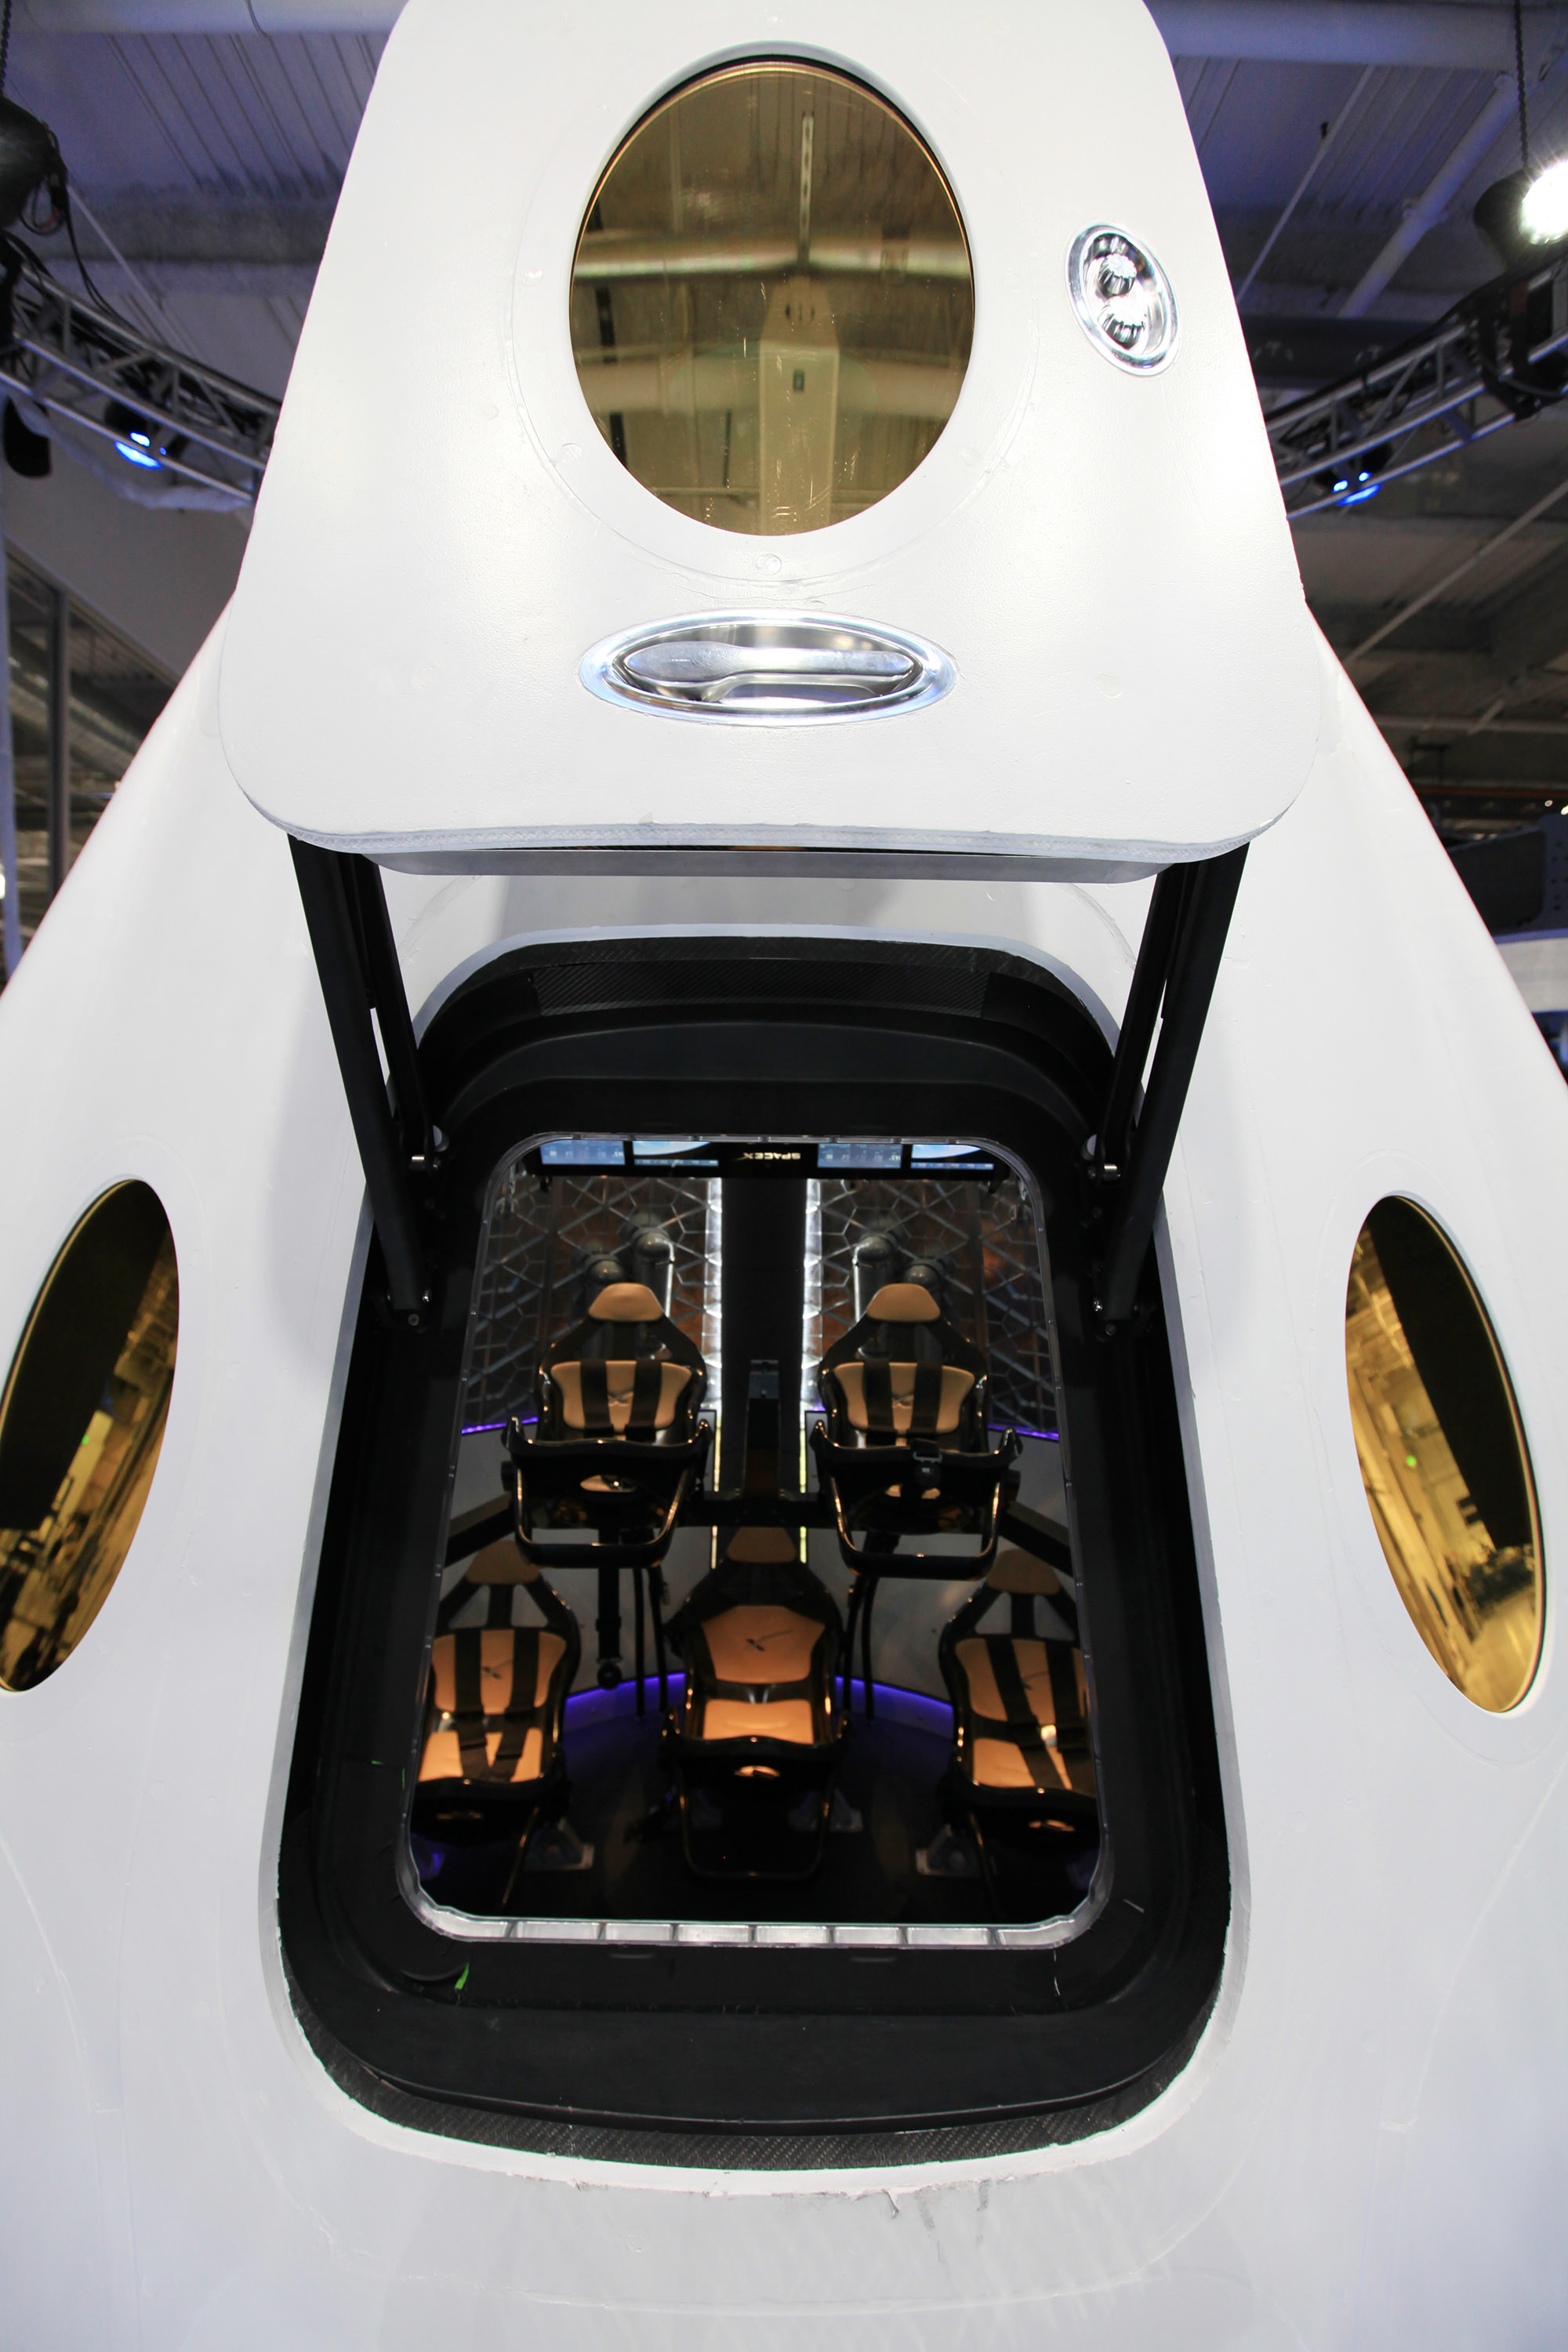 Enter the Dragon: First Look Inside SpaceX’s New Crew Transporter to ...